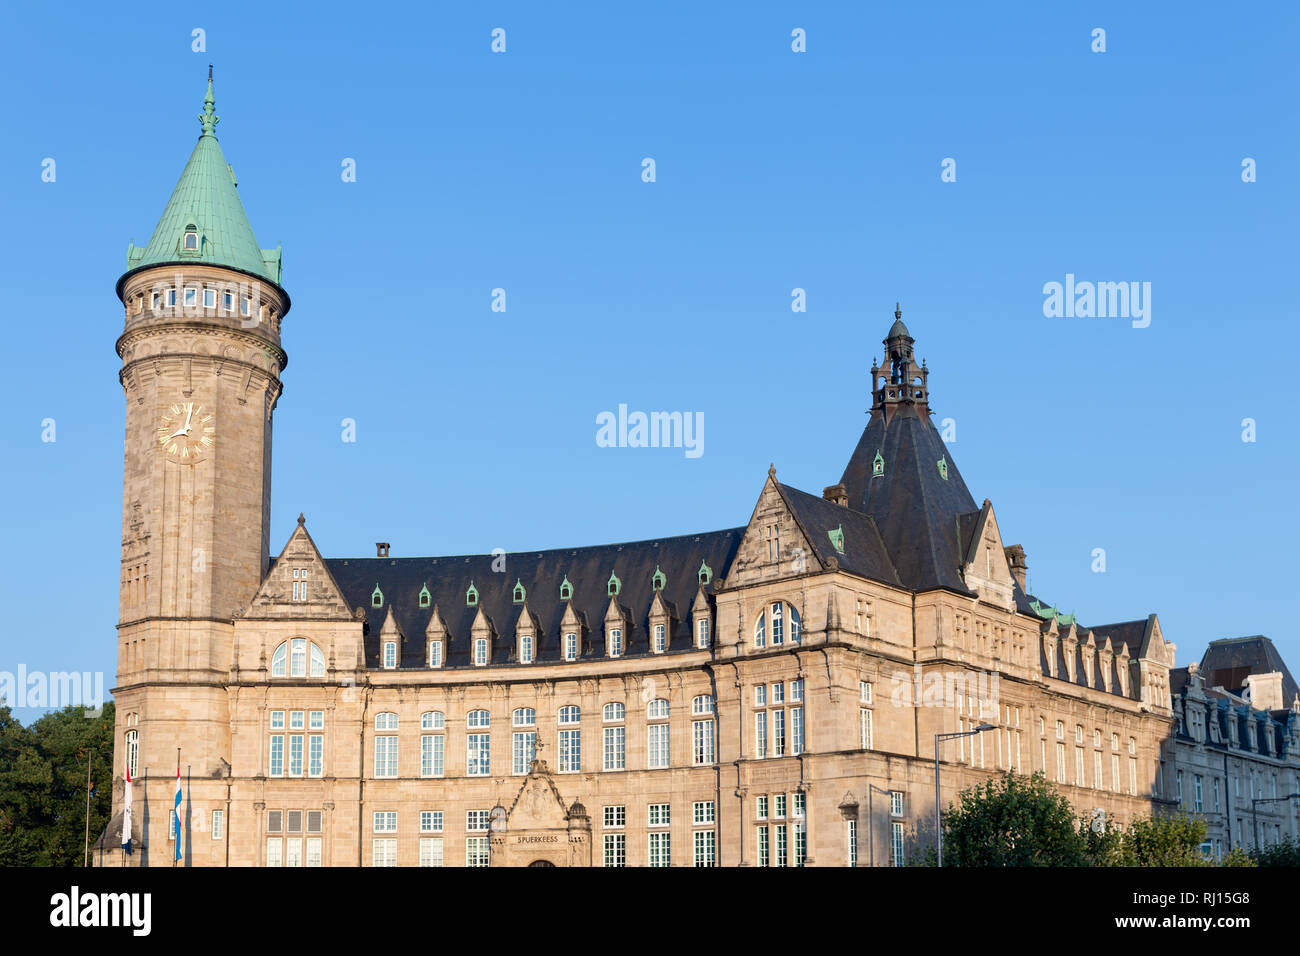 Spuerkeess BCEE bank with clock tower in Luxembourg city Stock Photo - Alamy